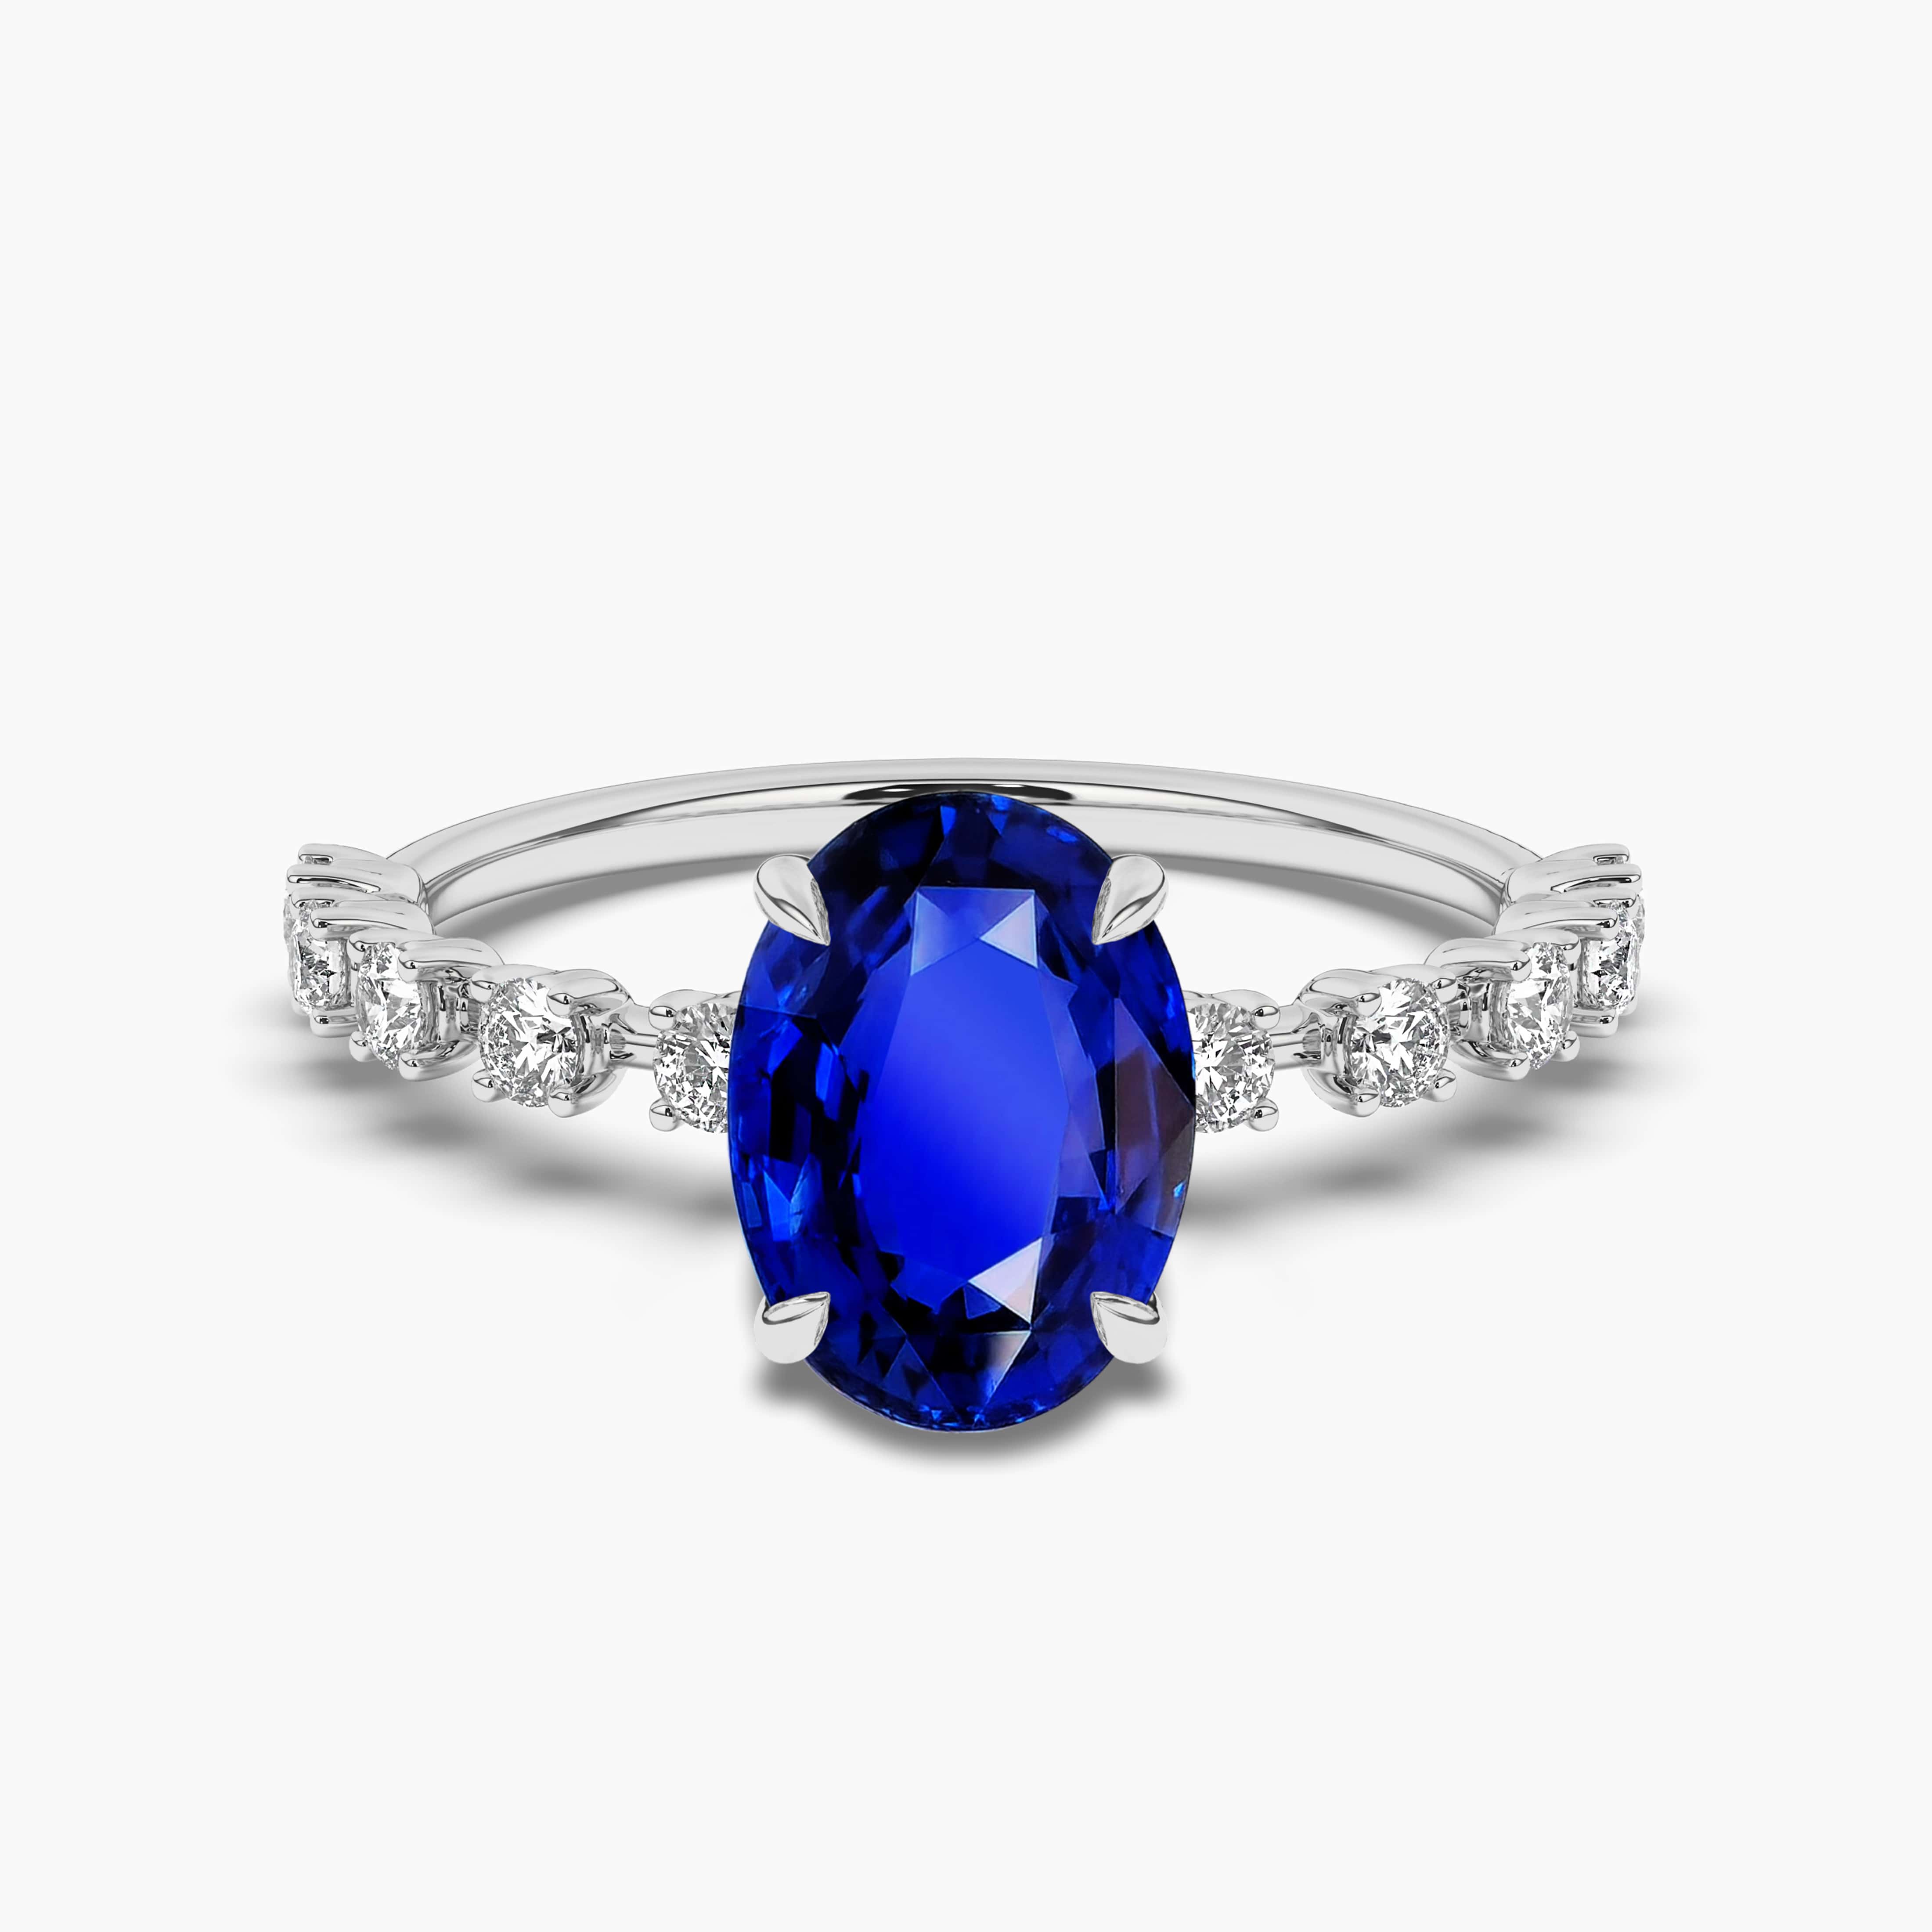 OVAL BLUE SAPPHIRE ENGAGEMENT RING SIDE STONE WITH DIAMOND 